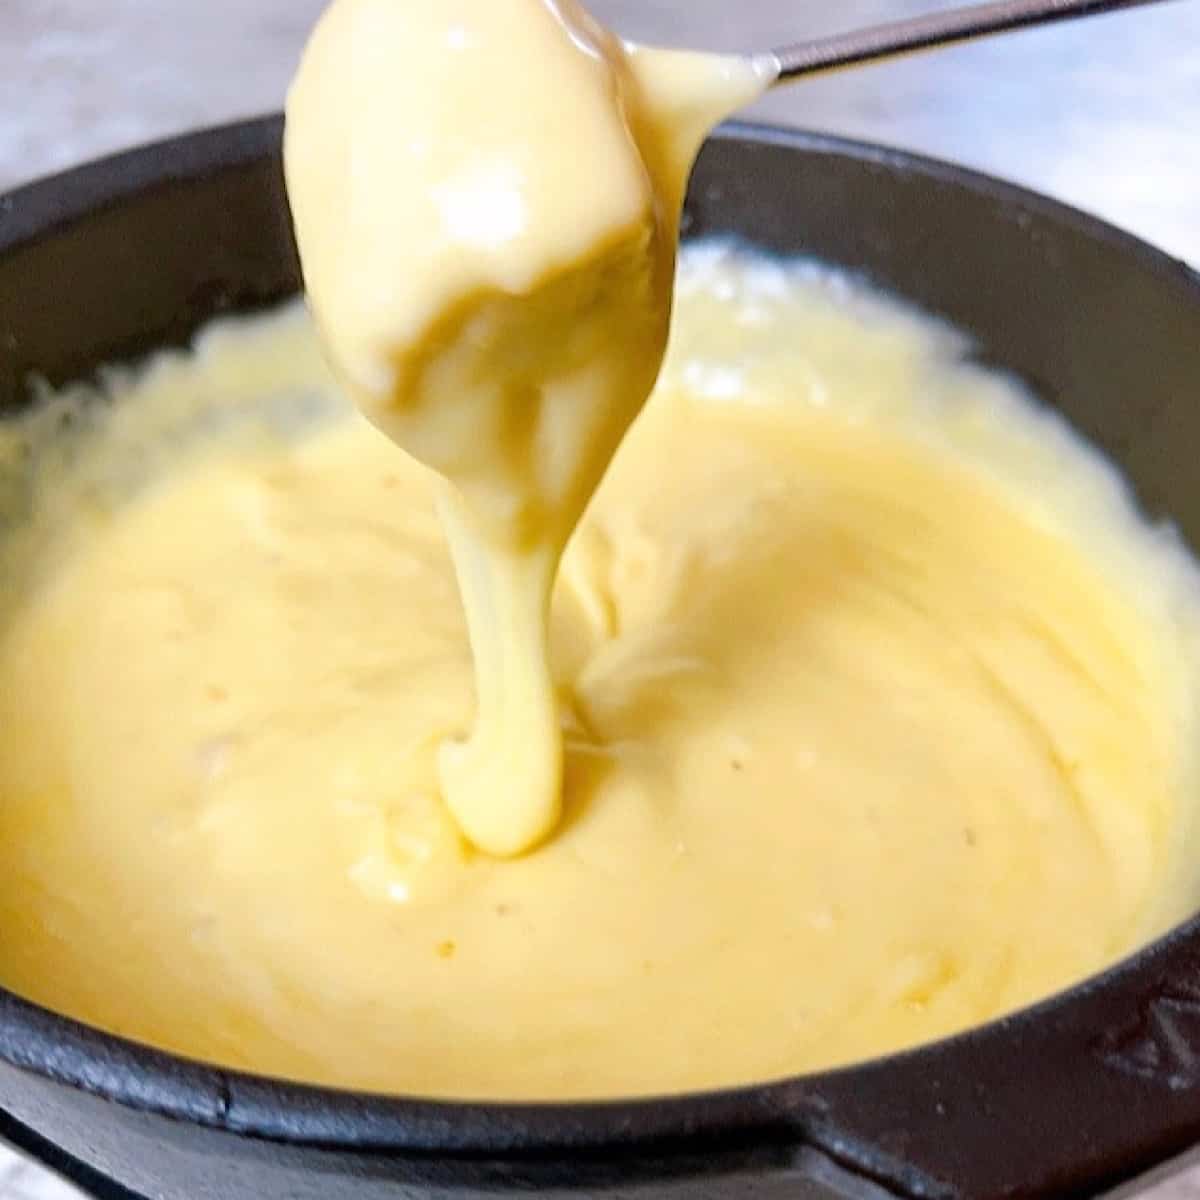 Cheese Fondue with bread dipped